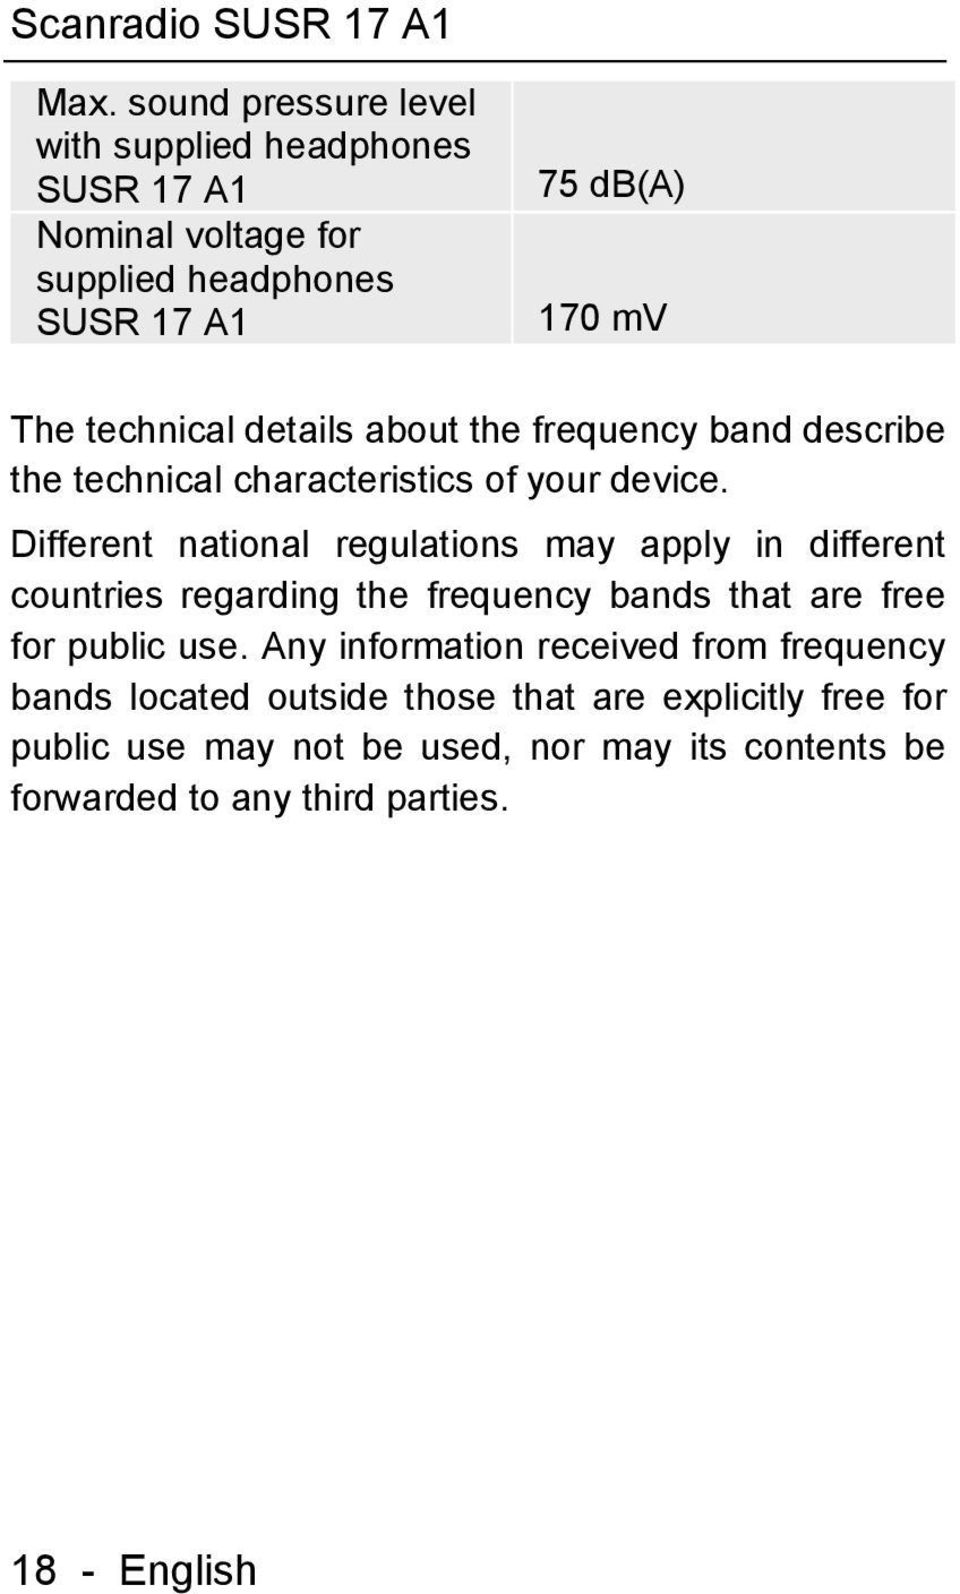 Different national regulations may apply in different countries regarding the frequency bands that are free for public use.